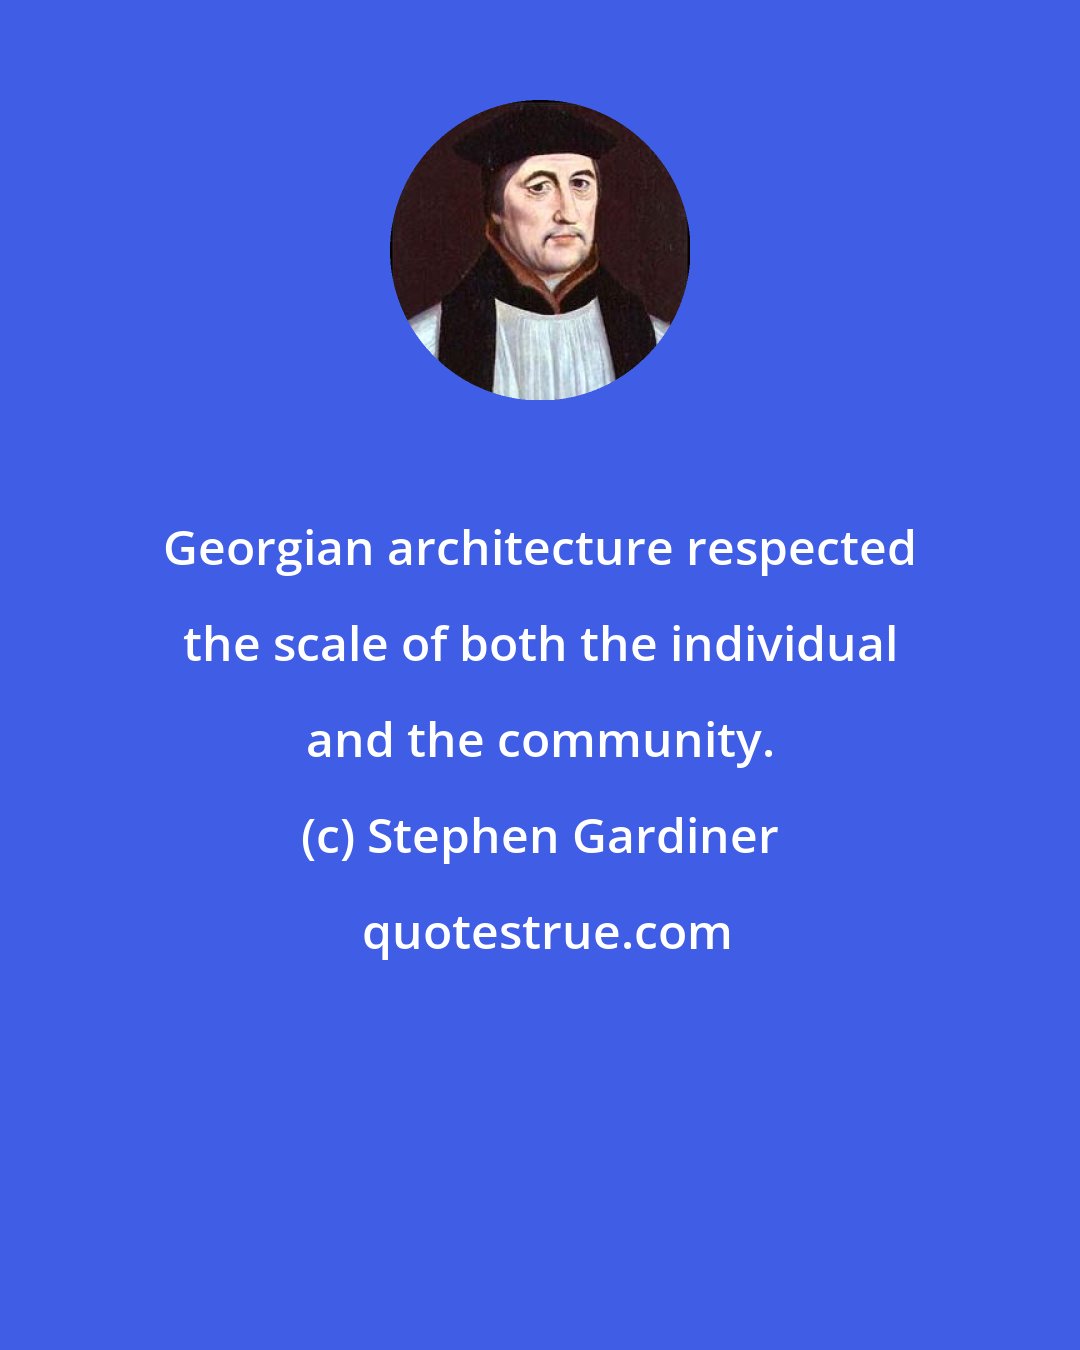 Stephen Gardiner: Georgian architecture respected the scale of both the individual and the community.